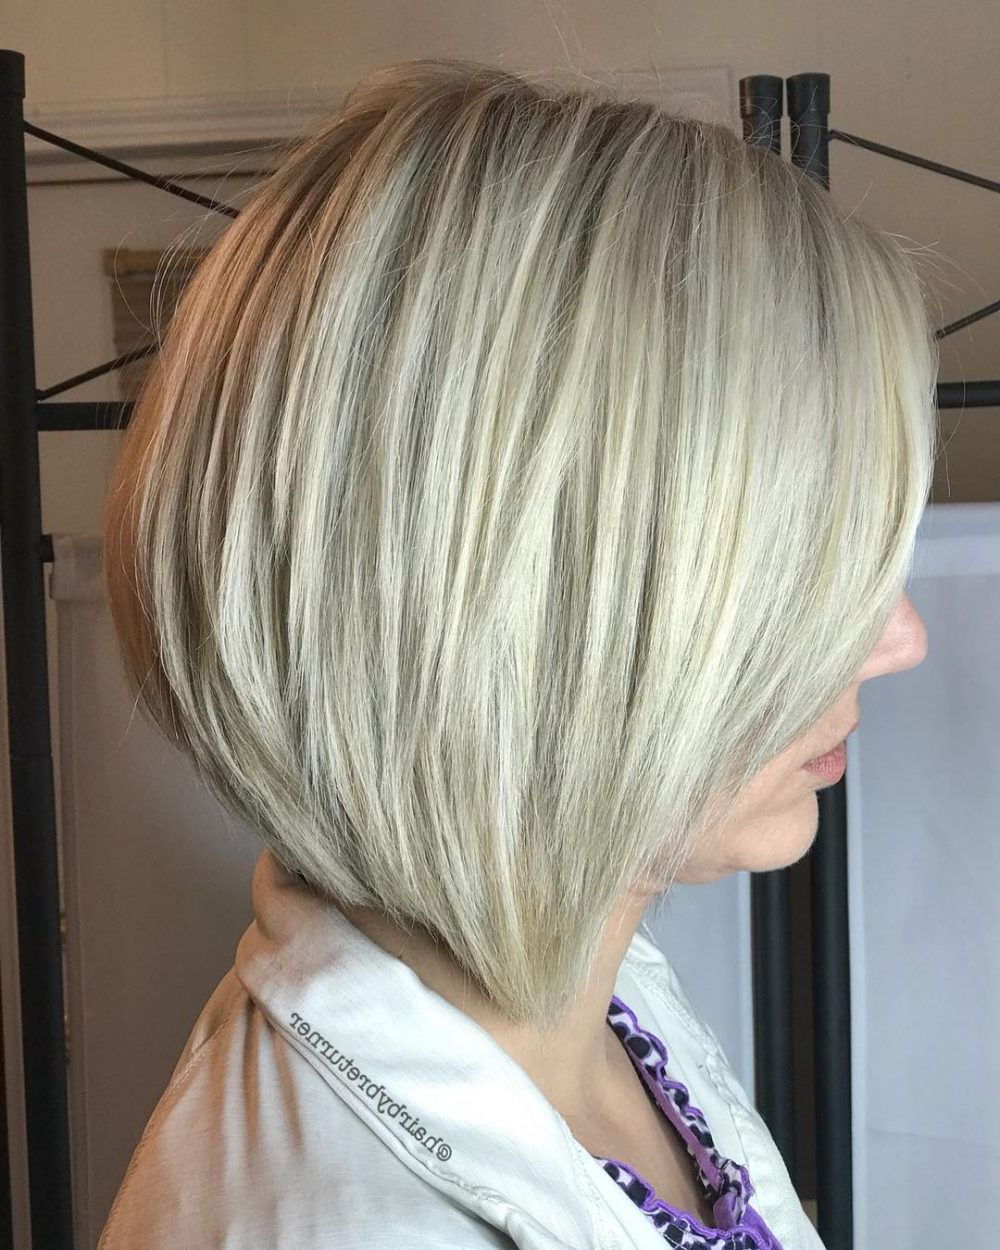 42 Sexiest Short Hairstyles For Women Over 40 In 2018 For Short Hairstyles For Women Over 40 With Fine Hair (View 8 of 25)